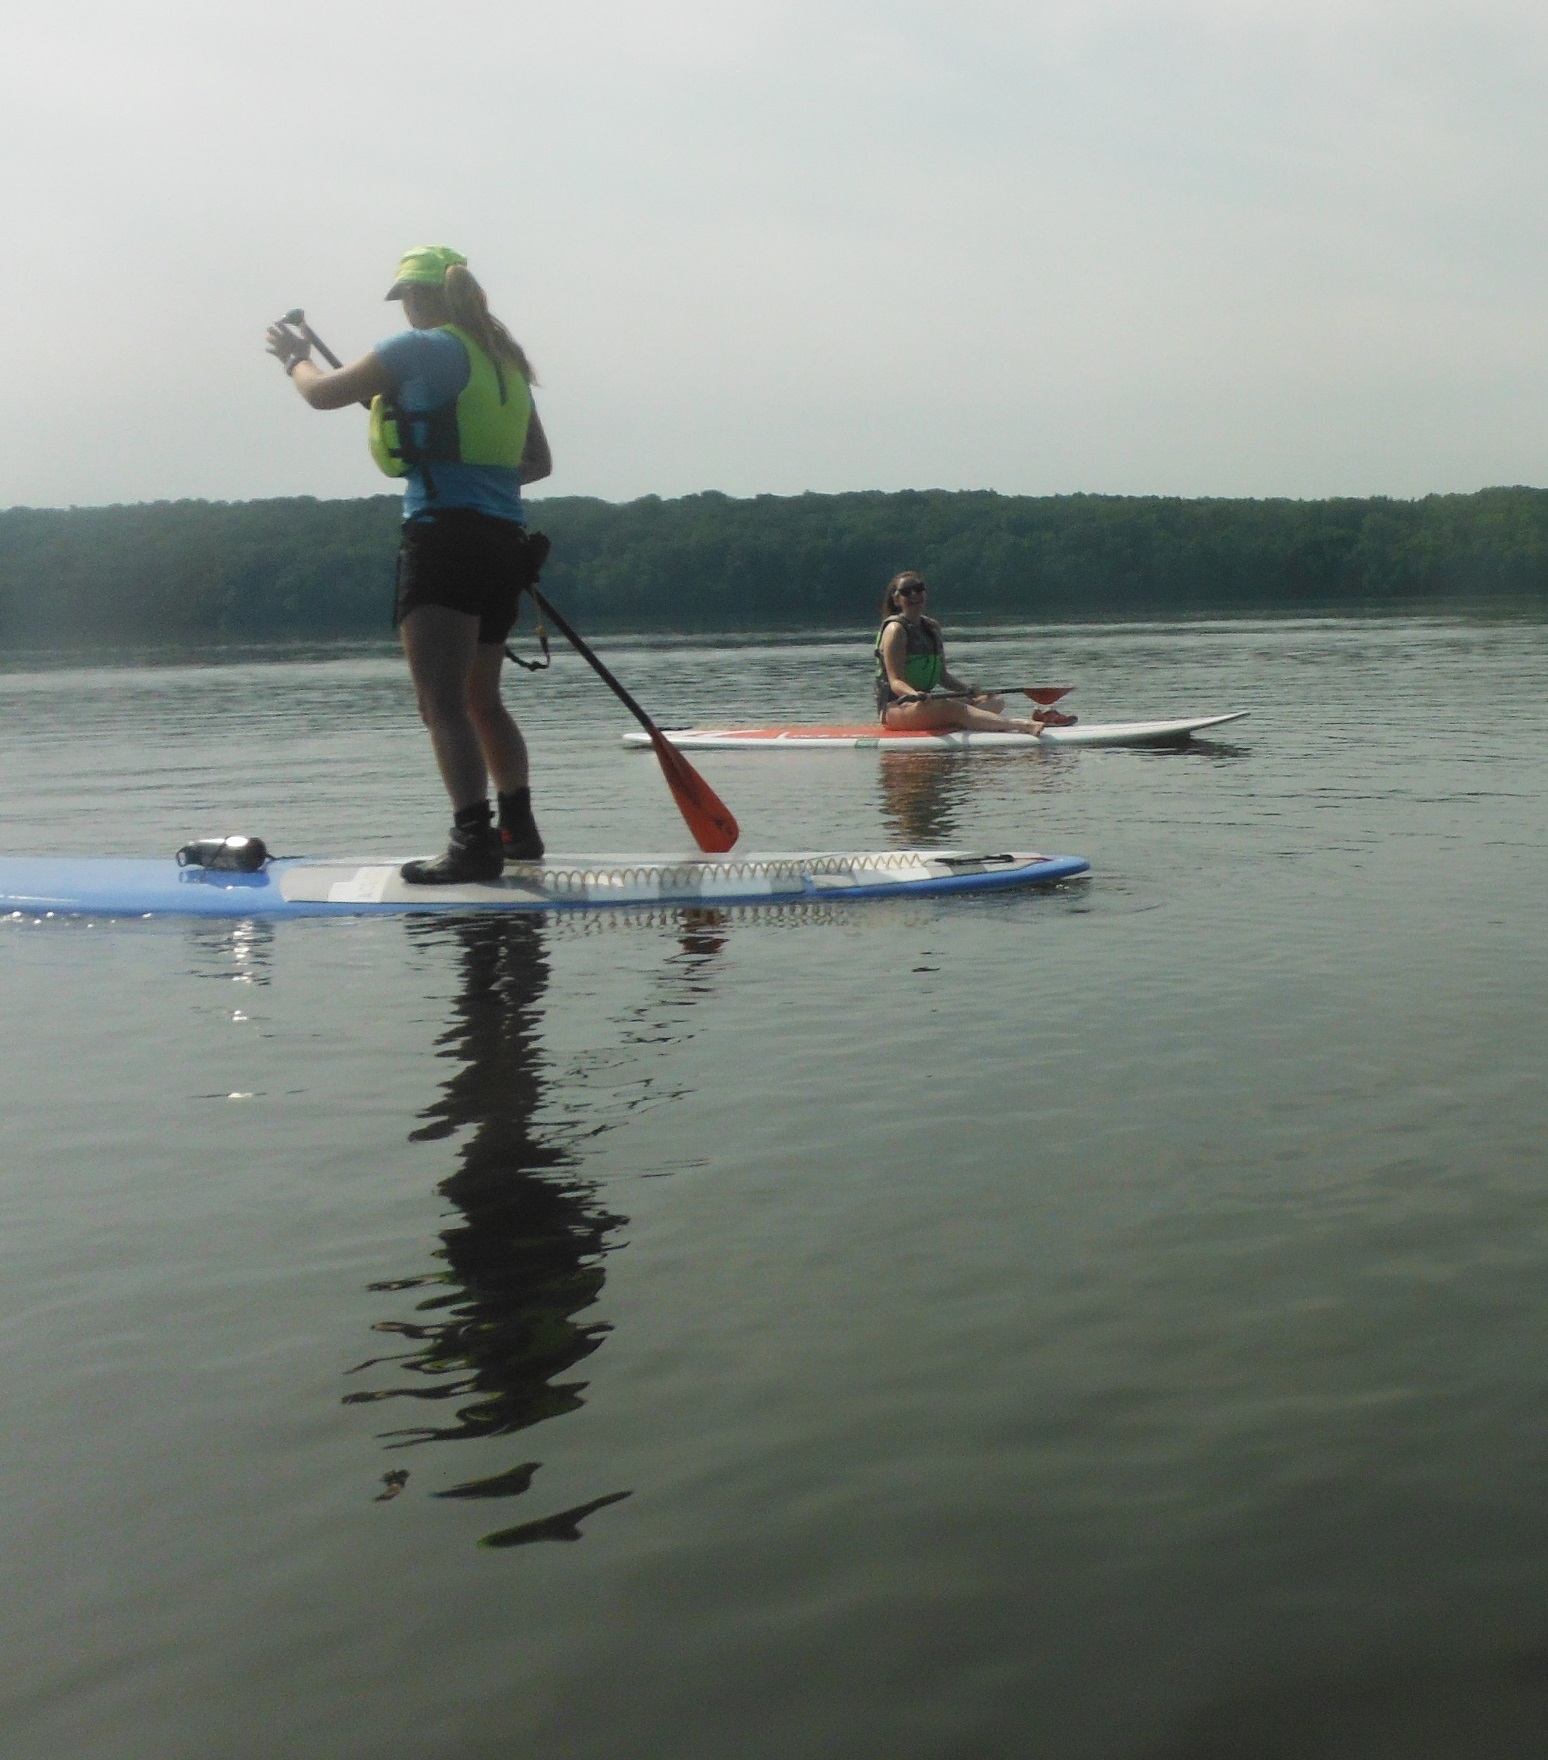 A woman on a stand up paddle board, another sits on one in the background